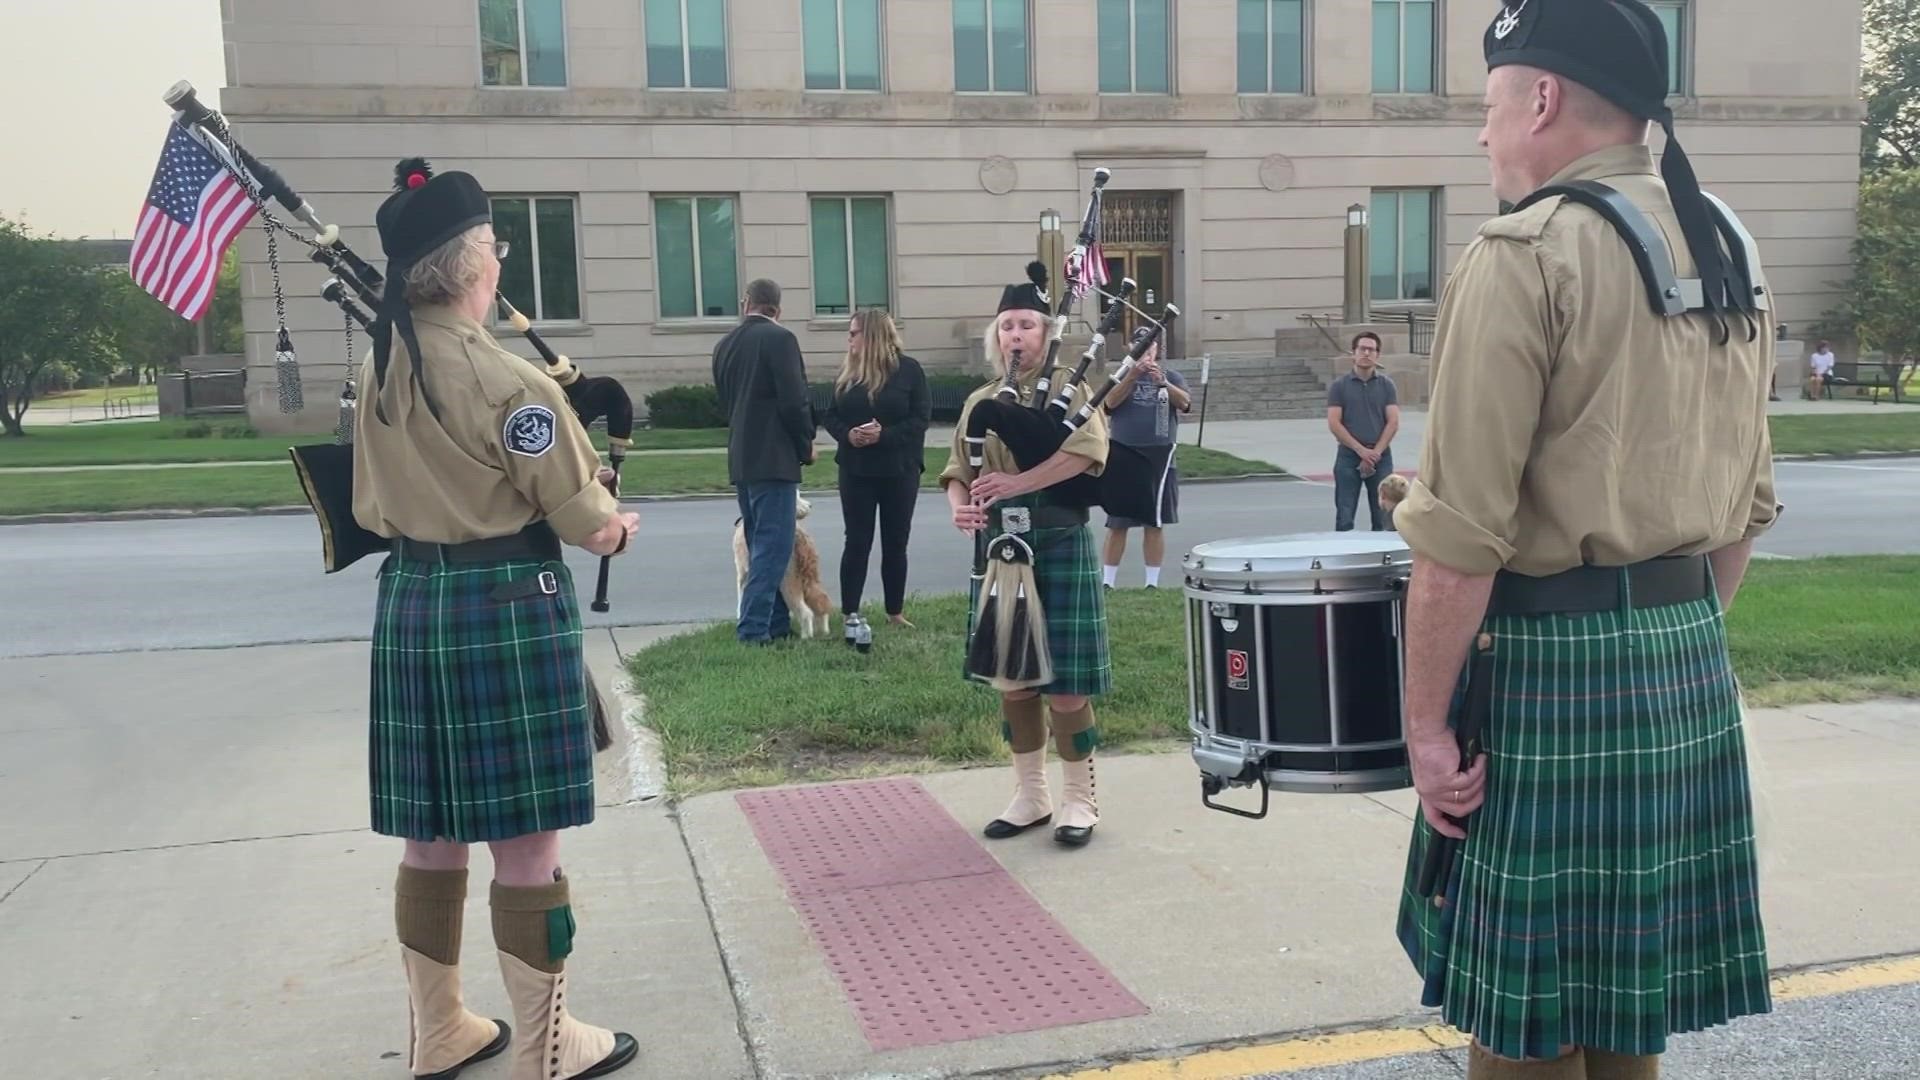 The Mackenzie Highlanders participated in the State Historical Society ceremony on the 20th anniversary of 9-11.